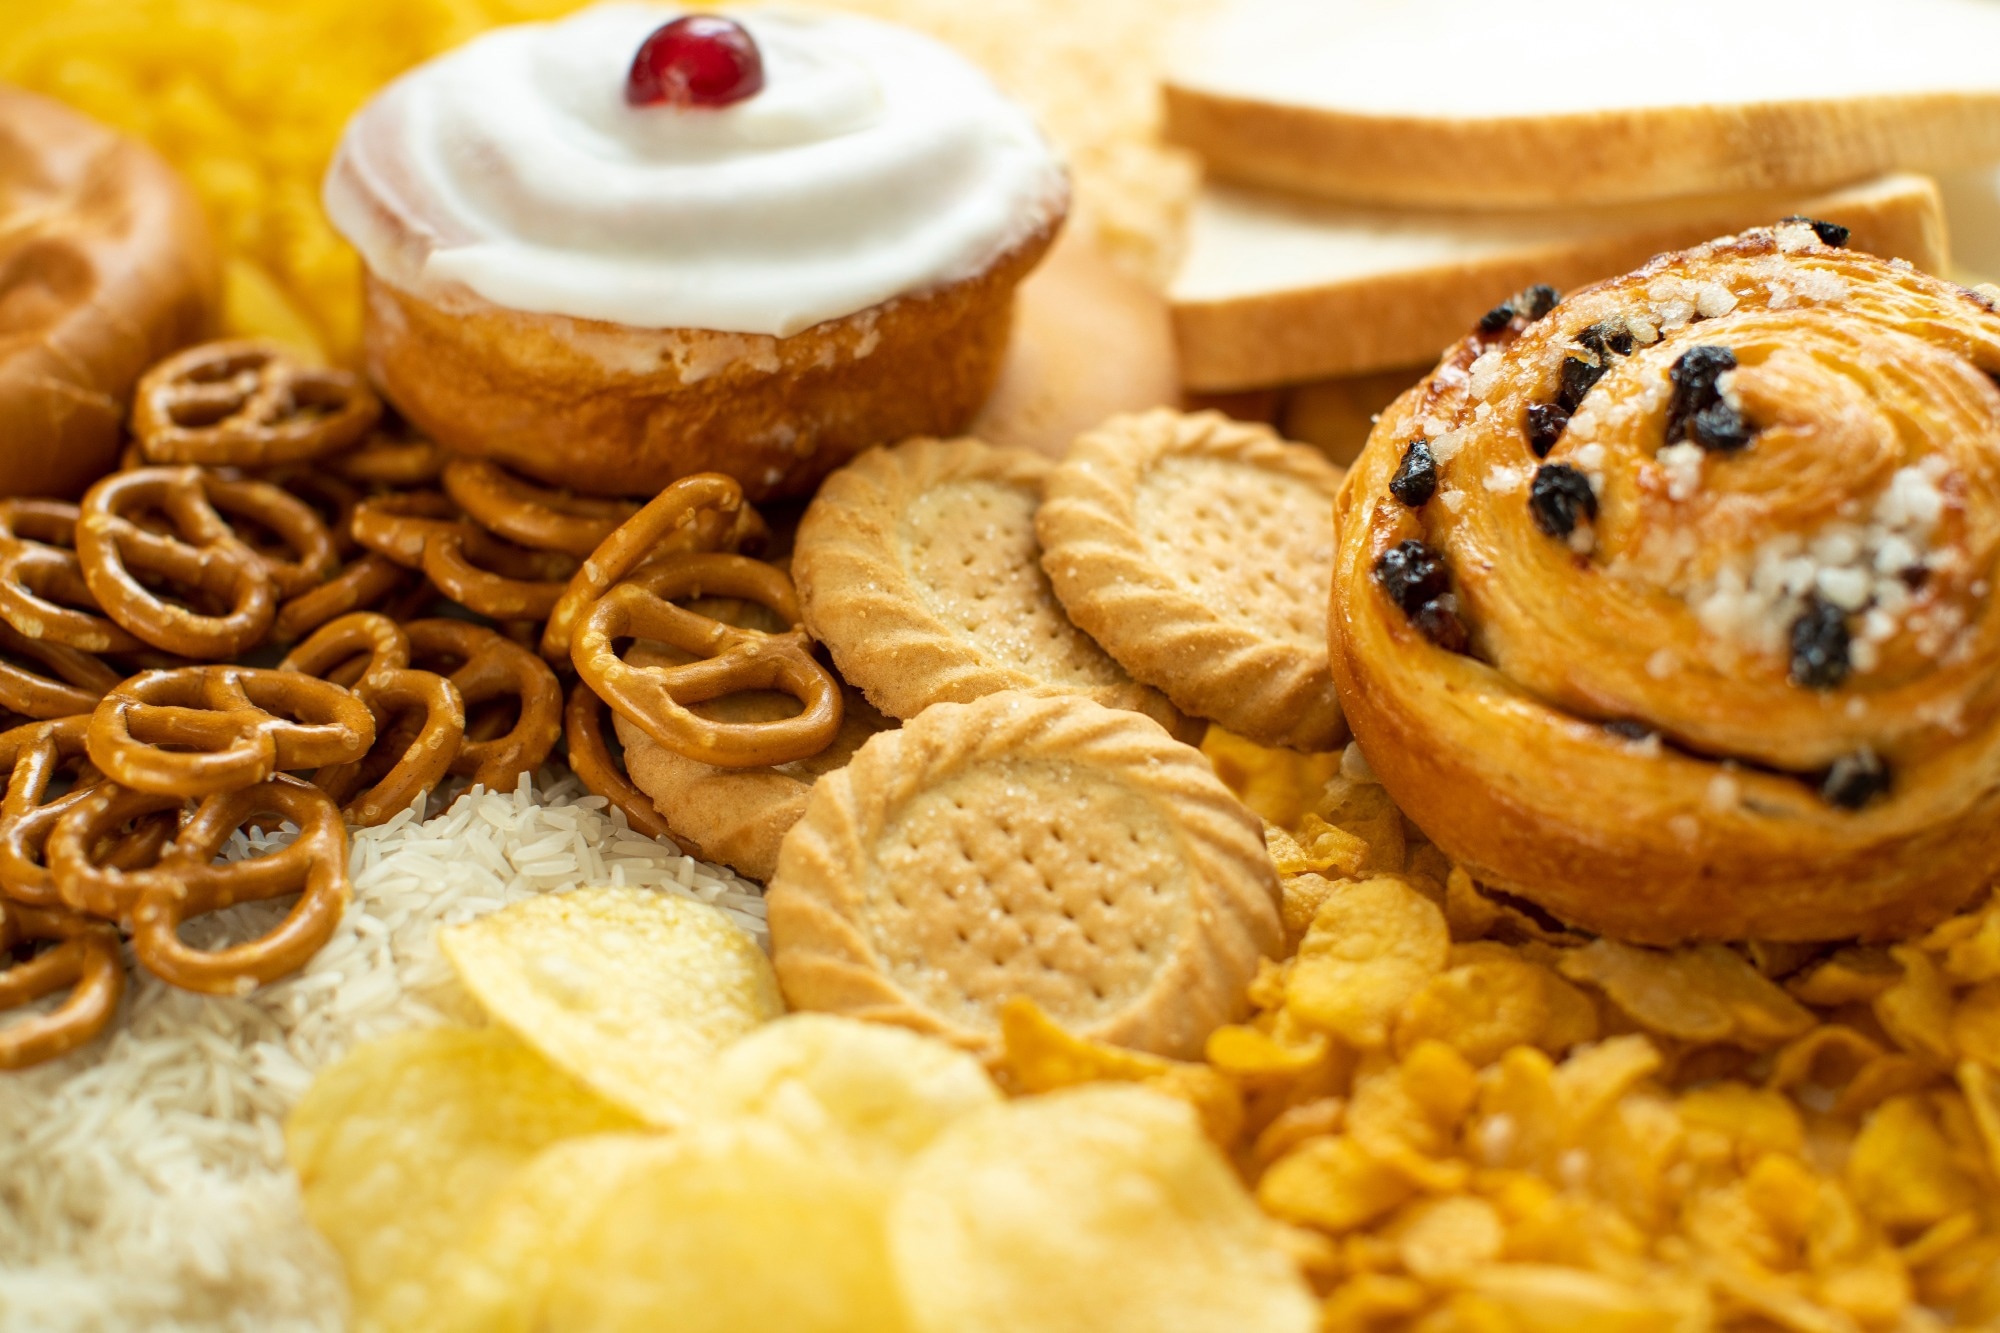 Study: Consumption of Ultraprocessed Food and Risk of Depression. Image Credit: Daisy Daisy/Shutterstock.com